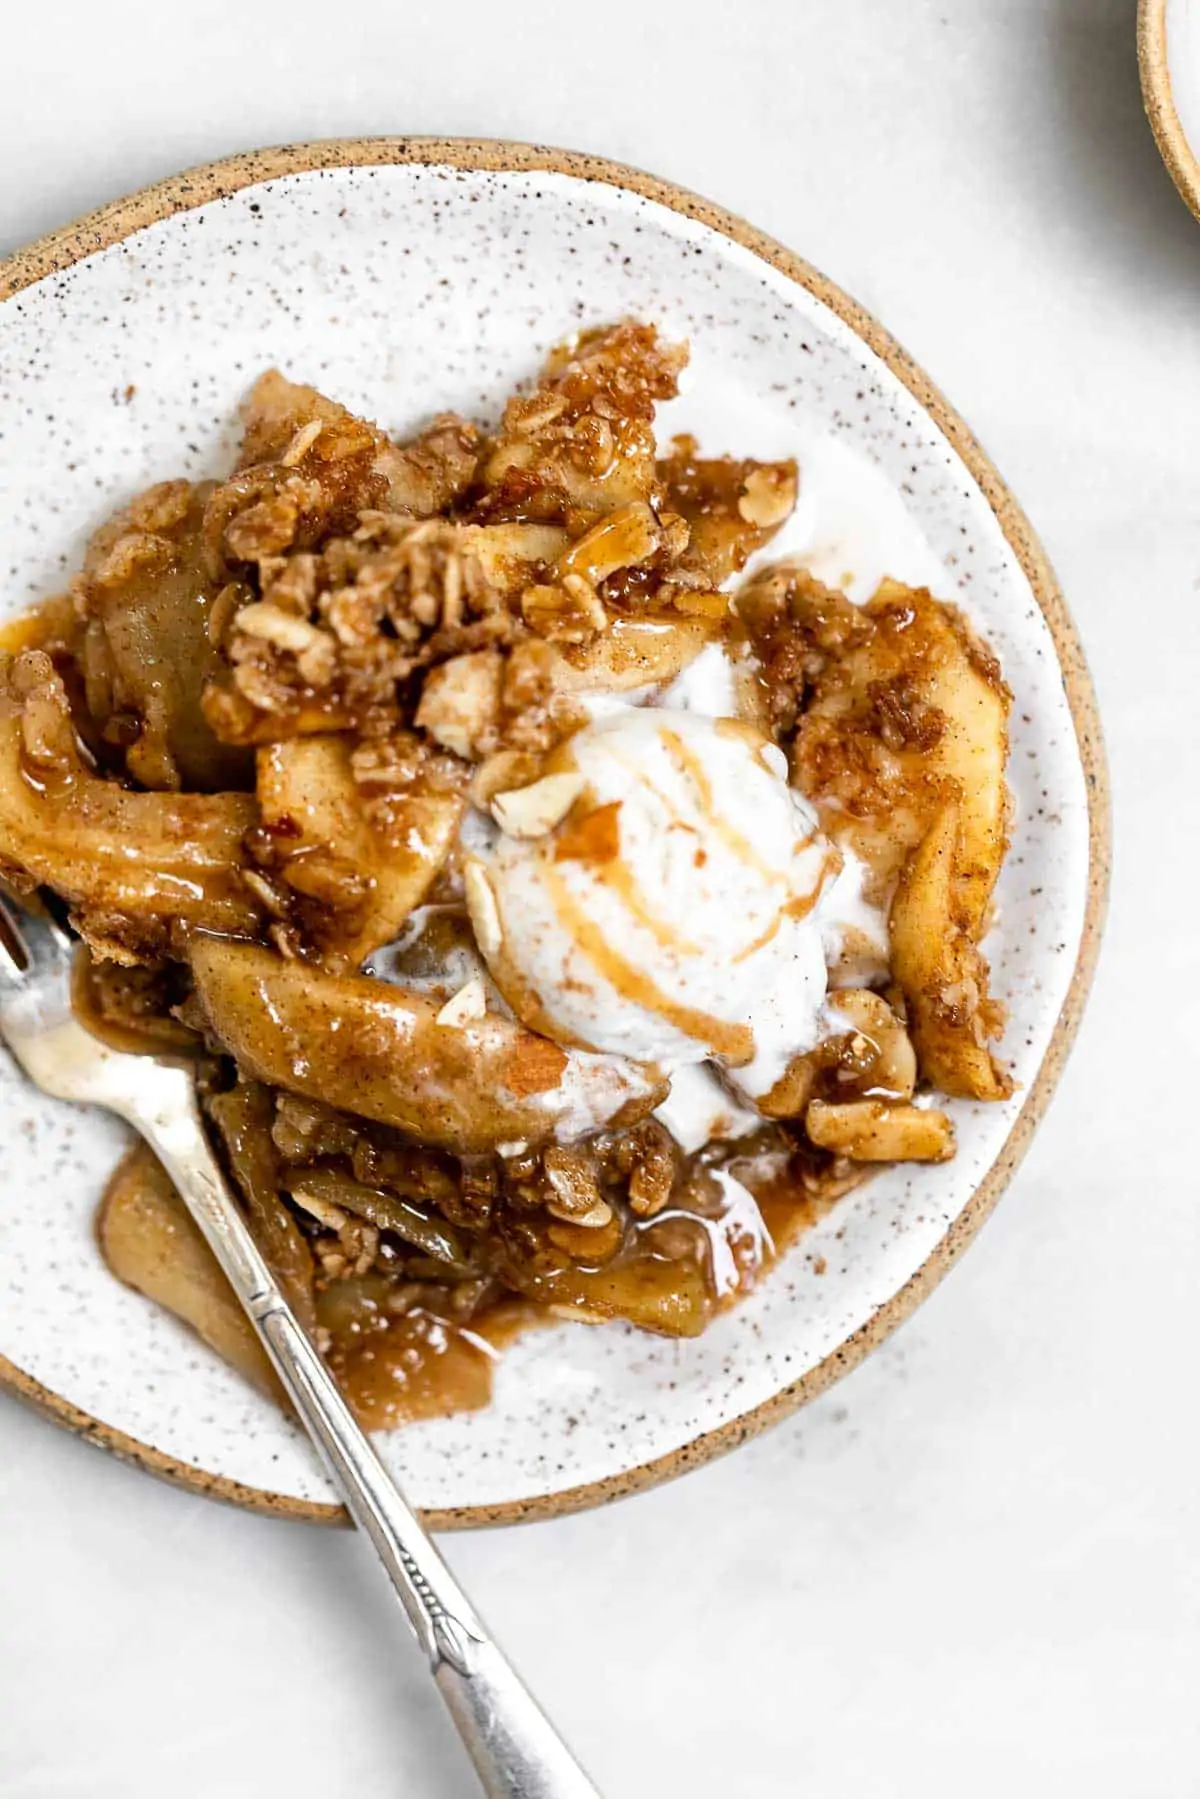 Apple crisp with oat crumble on a plate.